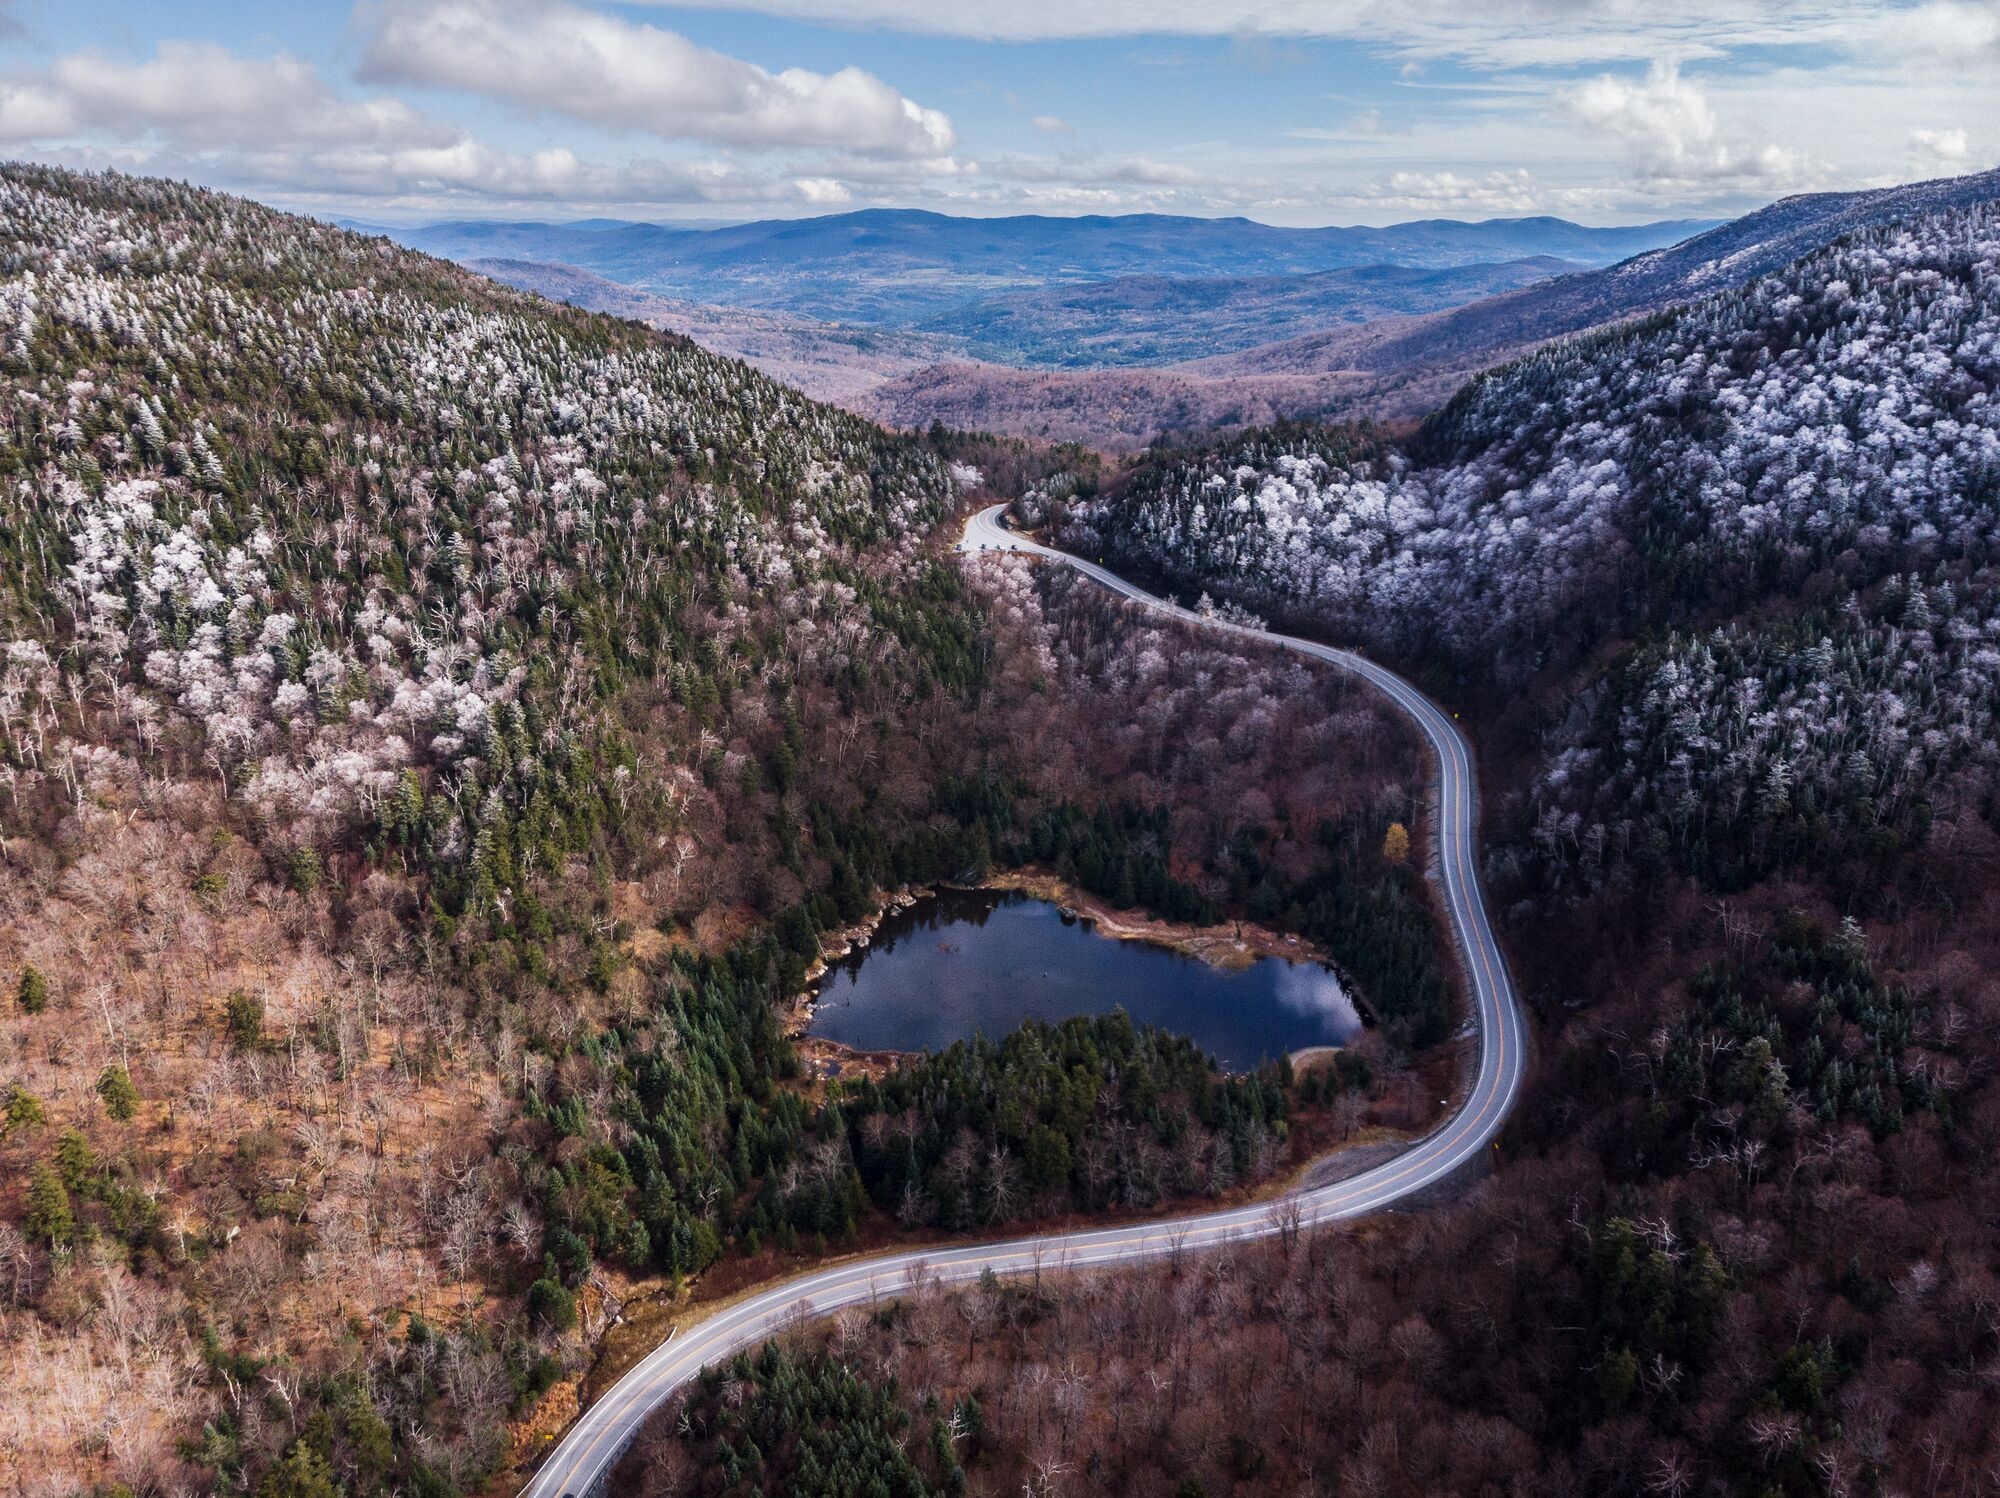 Seen from above, a winding road traverses through a mountain pass with a lake and snow-covered trees.